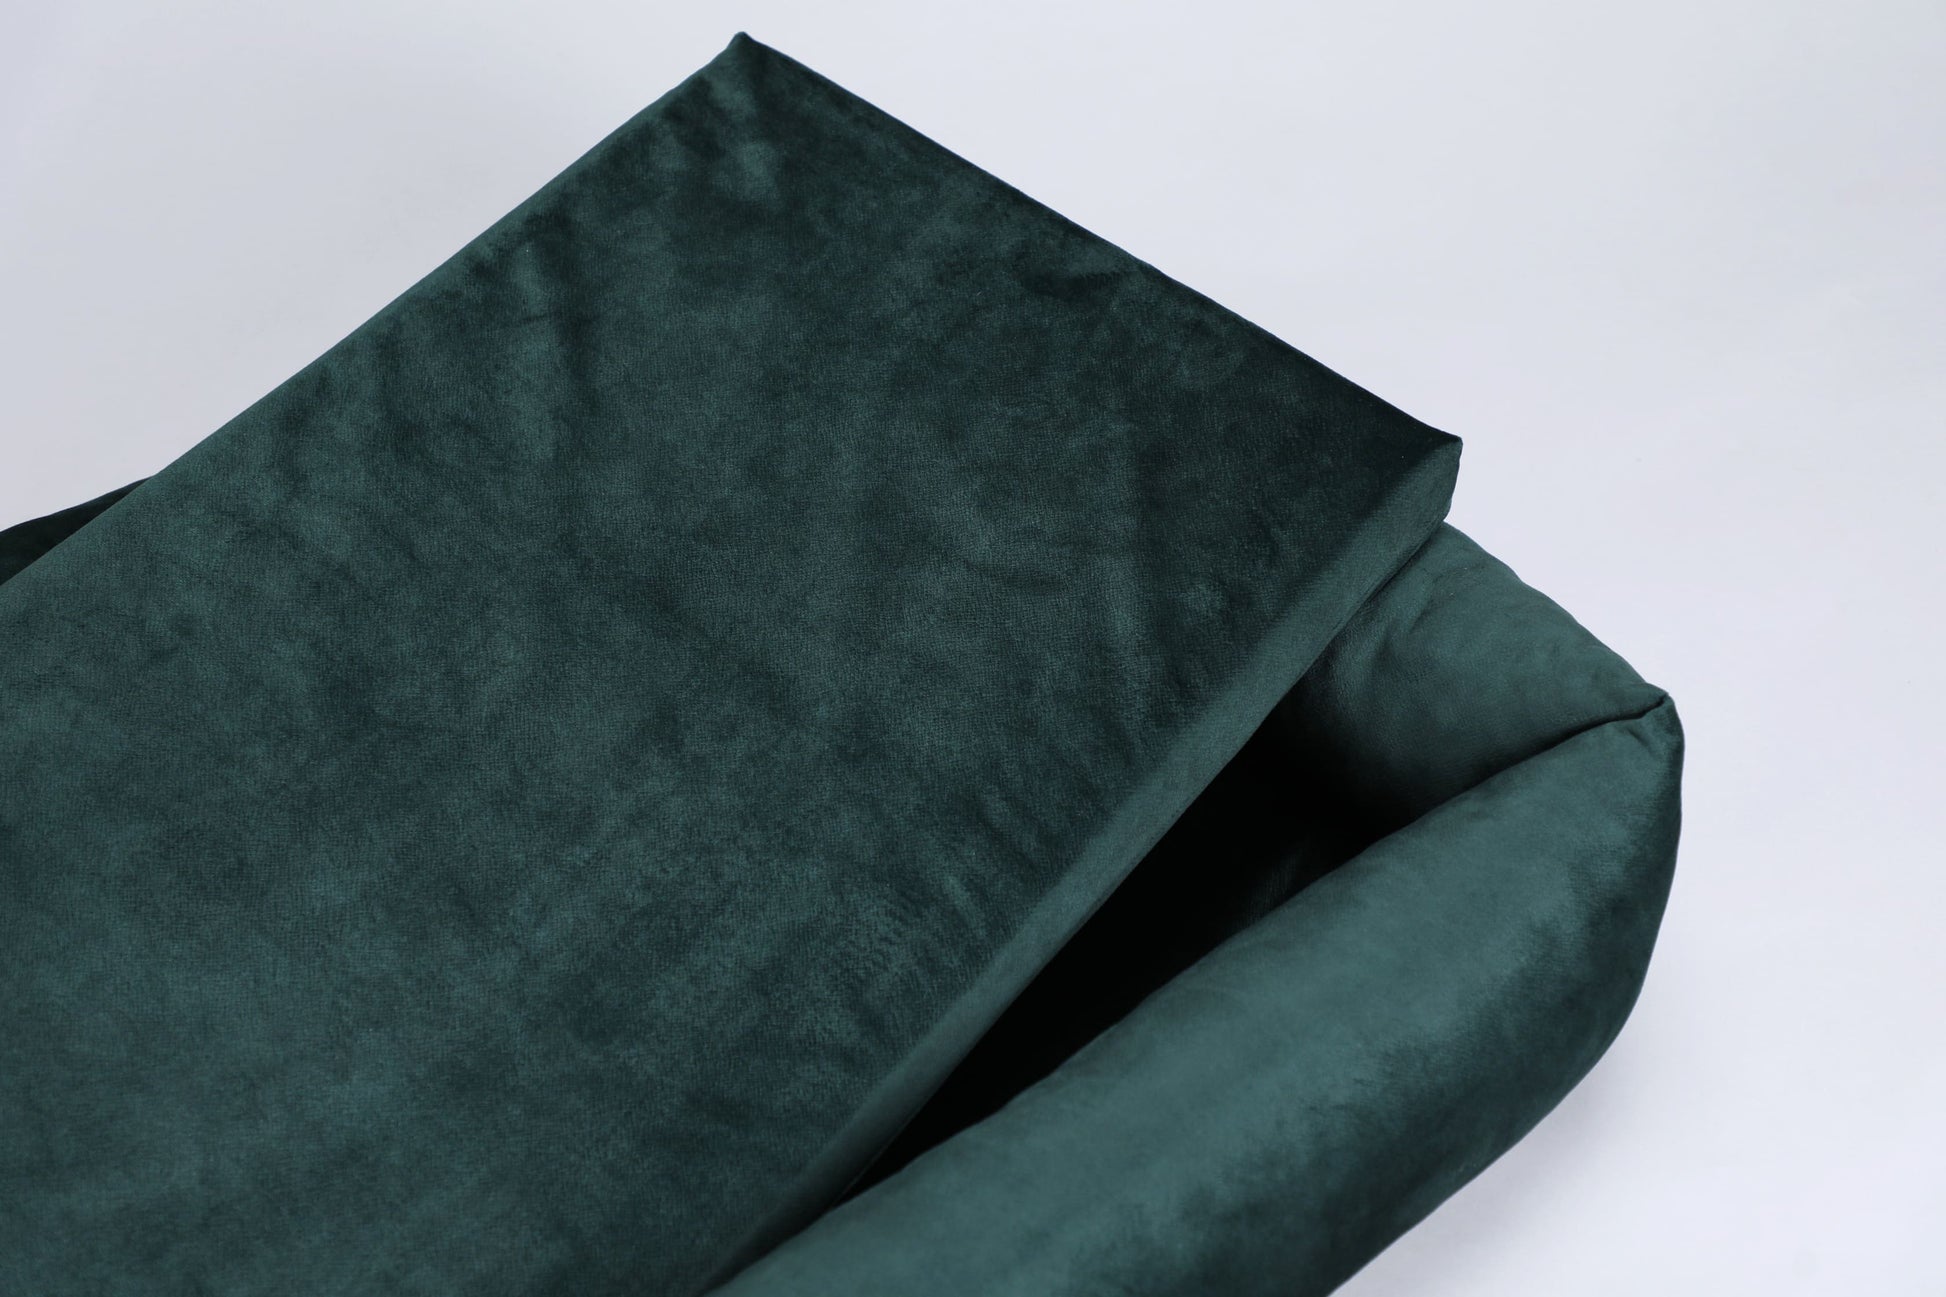 Premium dog bed with sides | 2-sided | EMERALD GREEN - premium dog goods handmade in Europe by animalistus